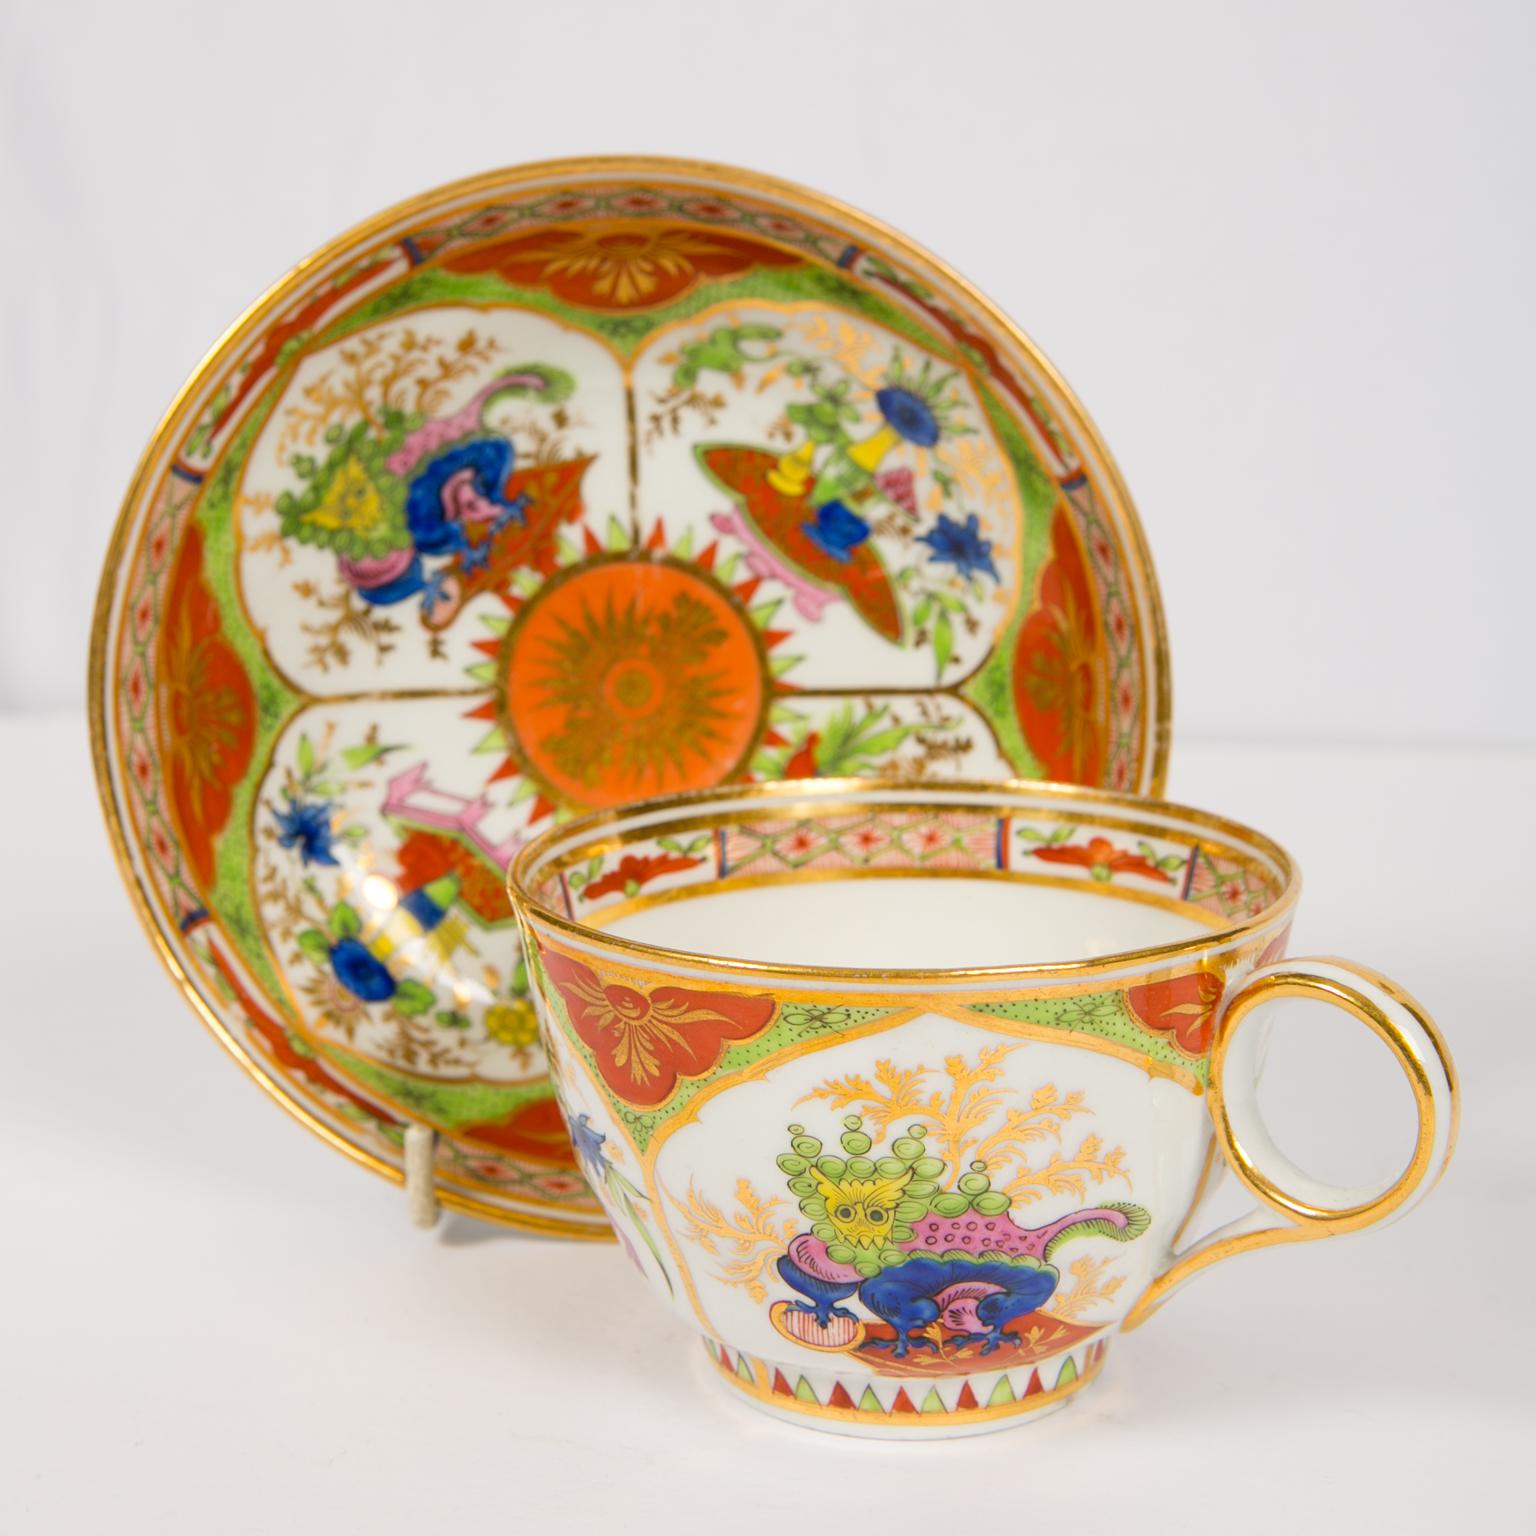 A set of three (the image shows four cups, one was sold) Chamberlain Worcester Dragon in compartments generous size, eight ounce tea cups and saucers. They are painted with mythical beasts alternating with vases all within lappet-shaped panels.
This